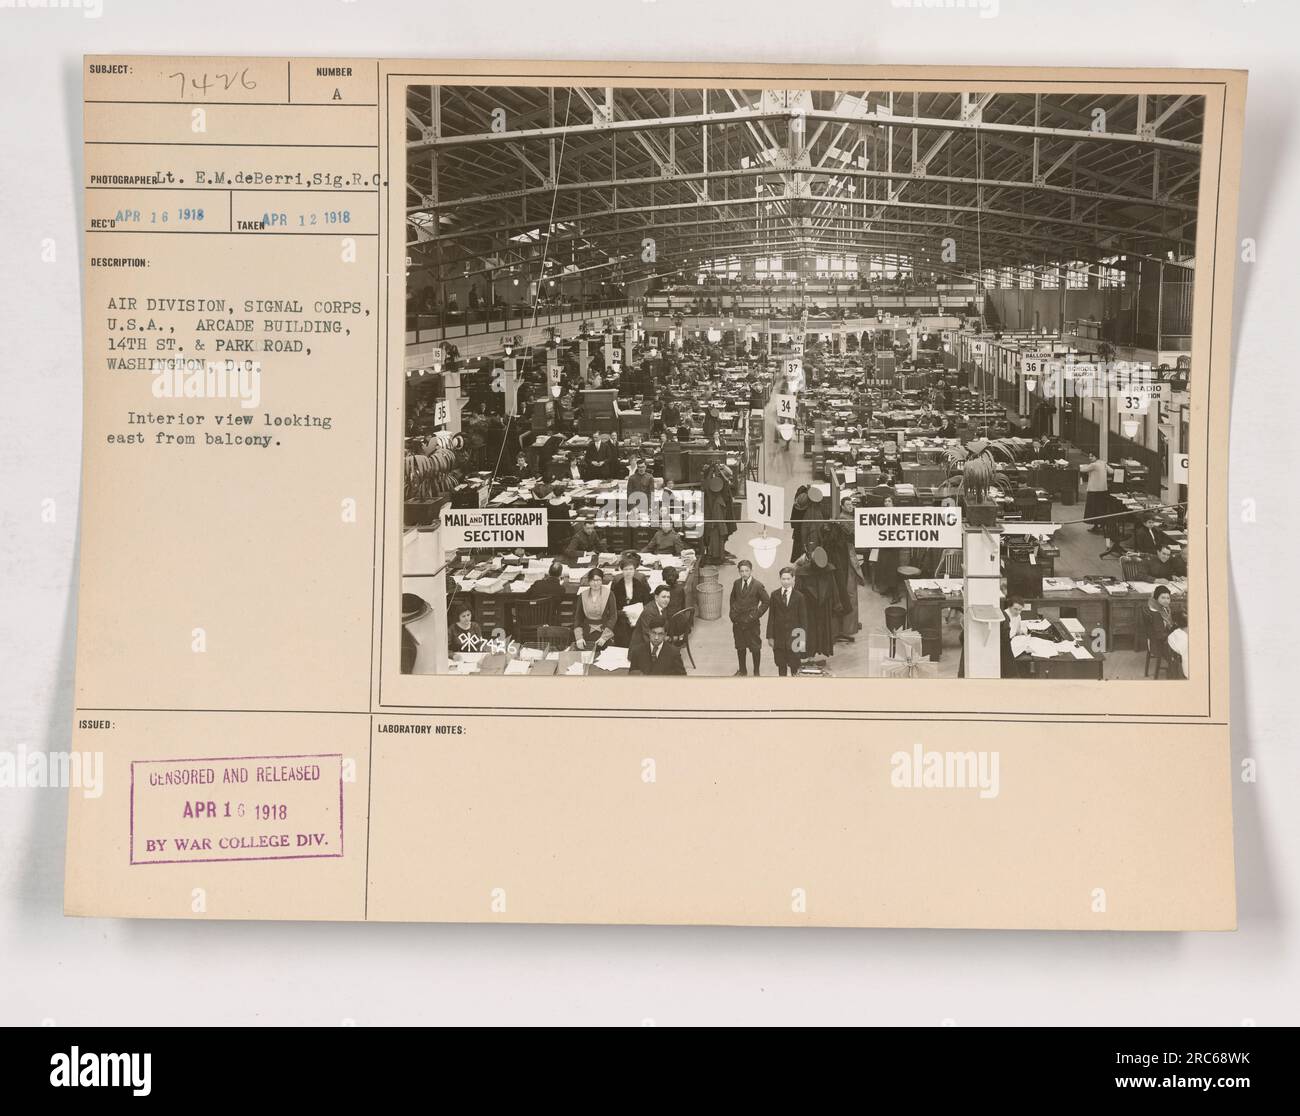 Interior view of the Arcade Building in Washington, D.C. taken by Lt. E.M.deBerri of the Signal Corps. The photograph shows an eastward view from the balcony. The image was censored and released on April 16, 1918 by the War College Division. The building housed the Air Division, Signal Corps, U.S.A. Stock Photo